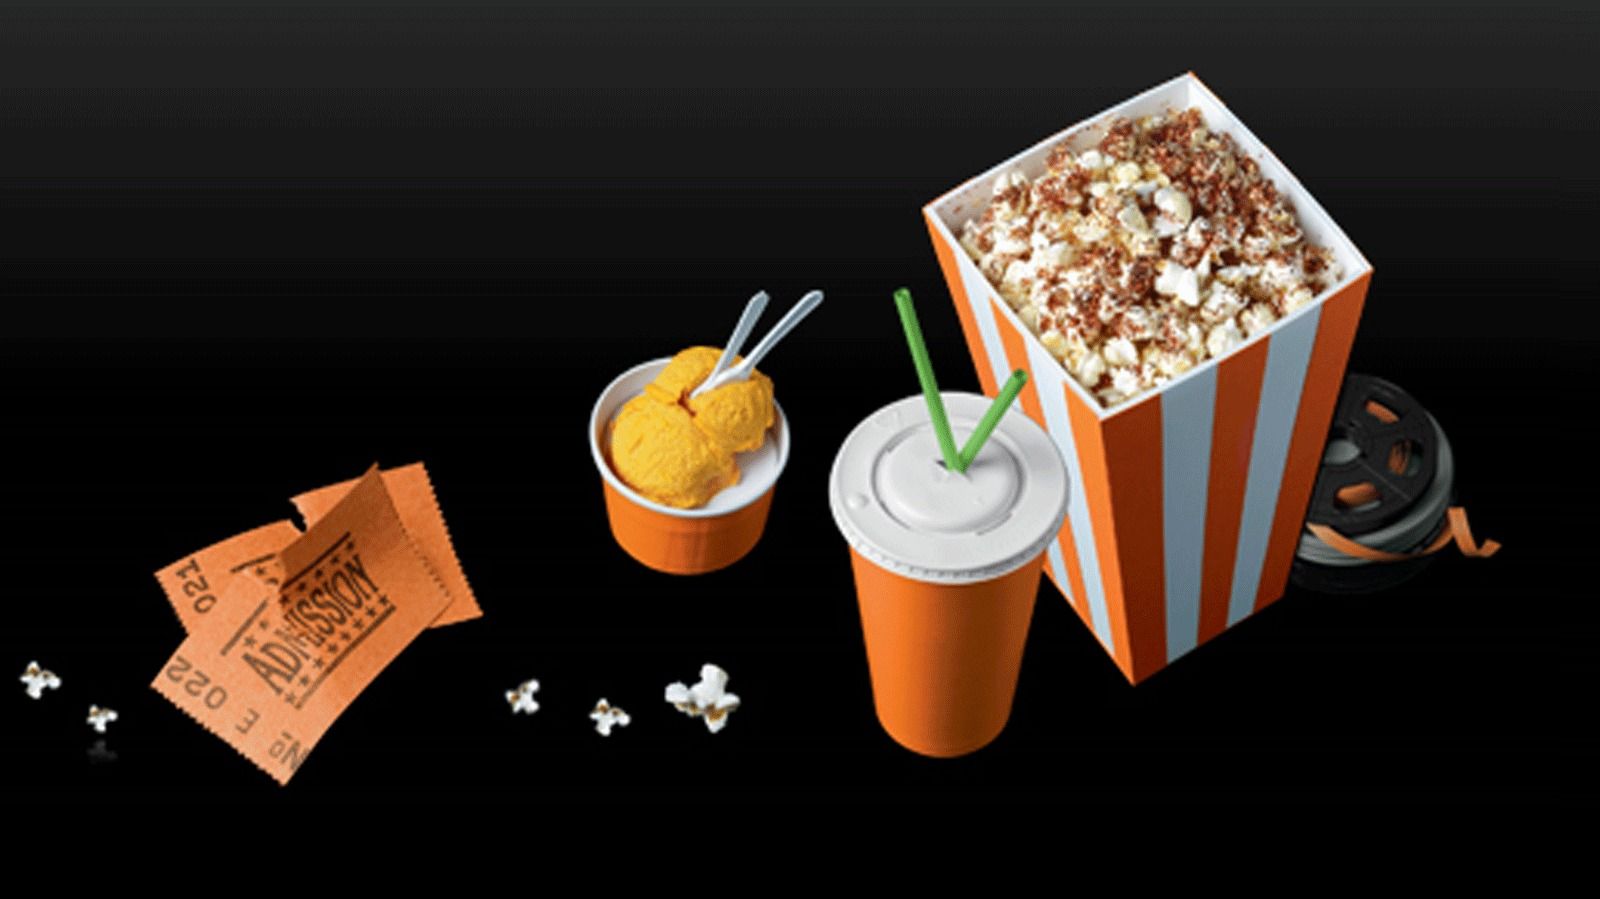 ee is going to kill the orange wednesdays cinema deal image 1